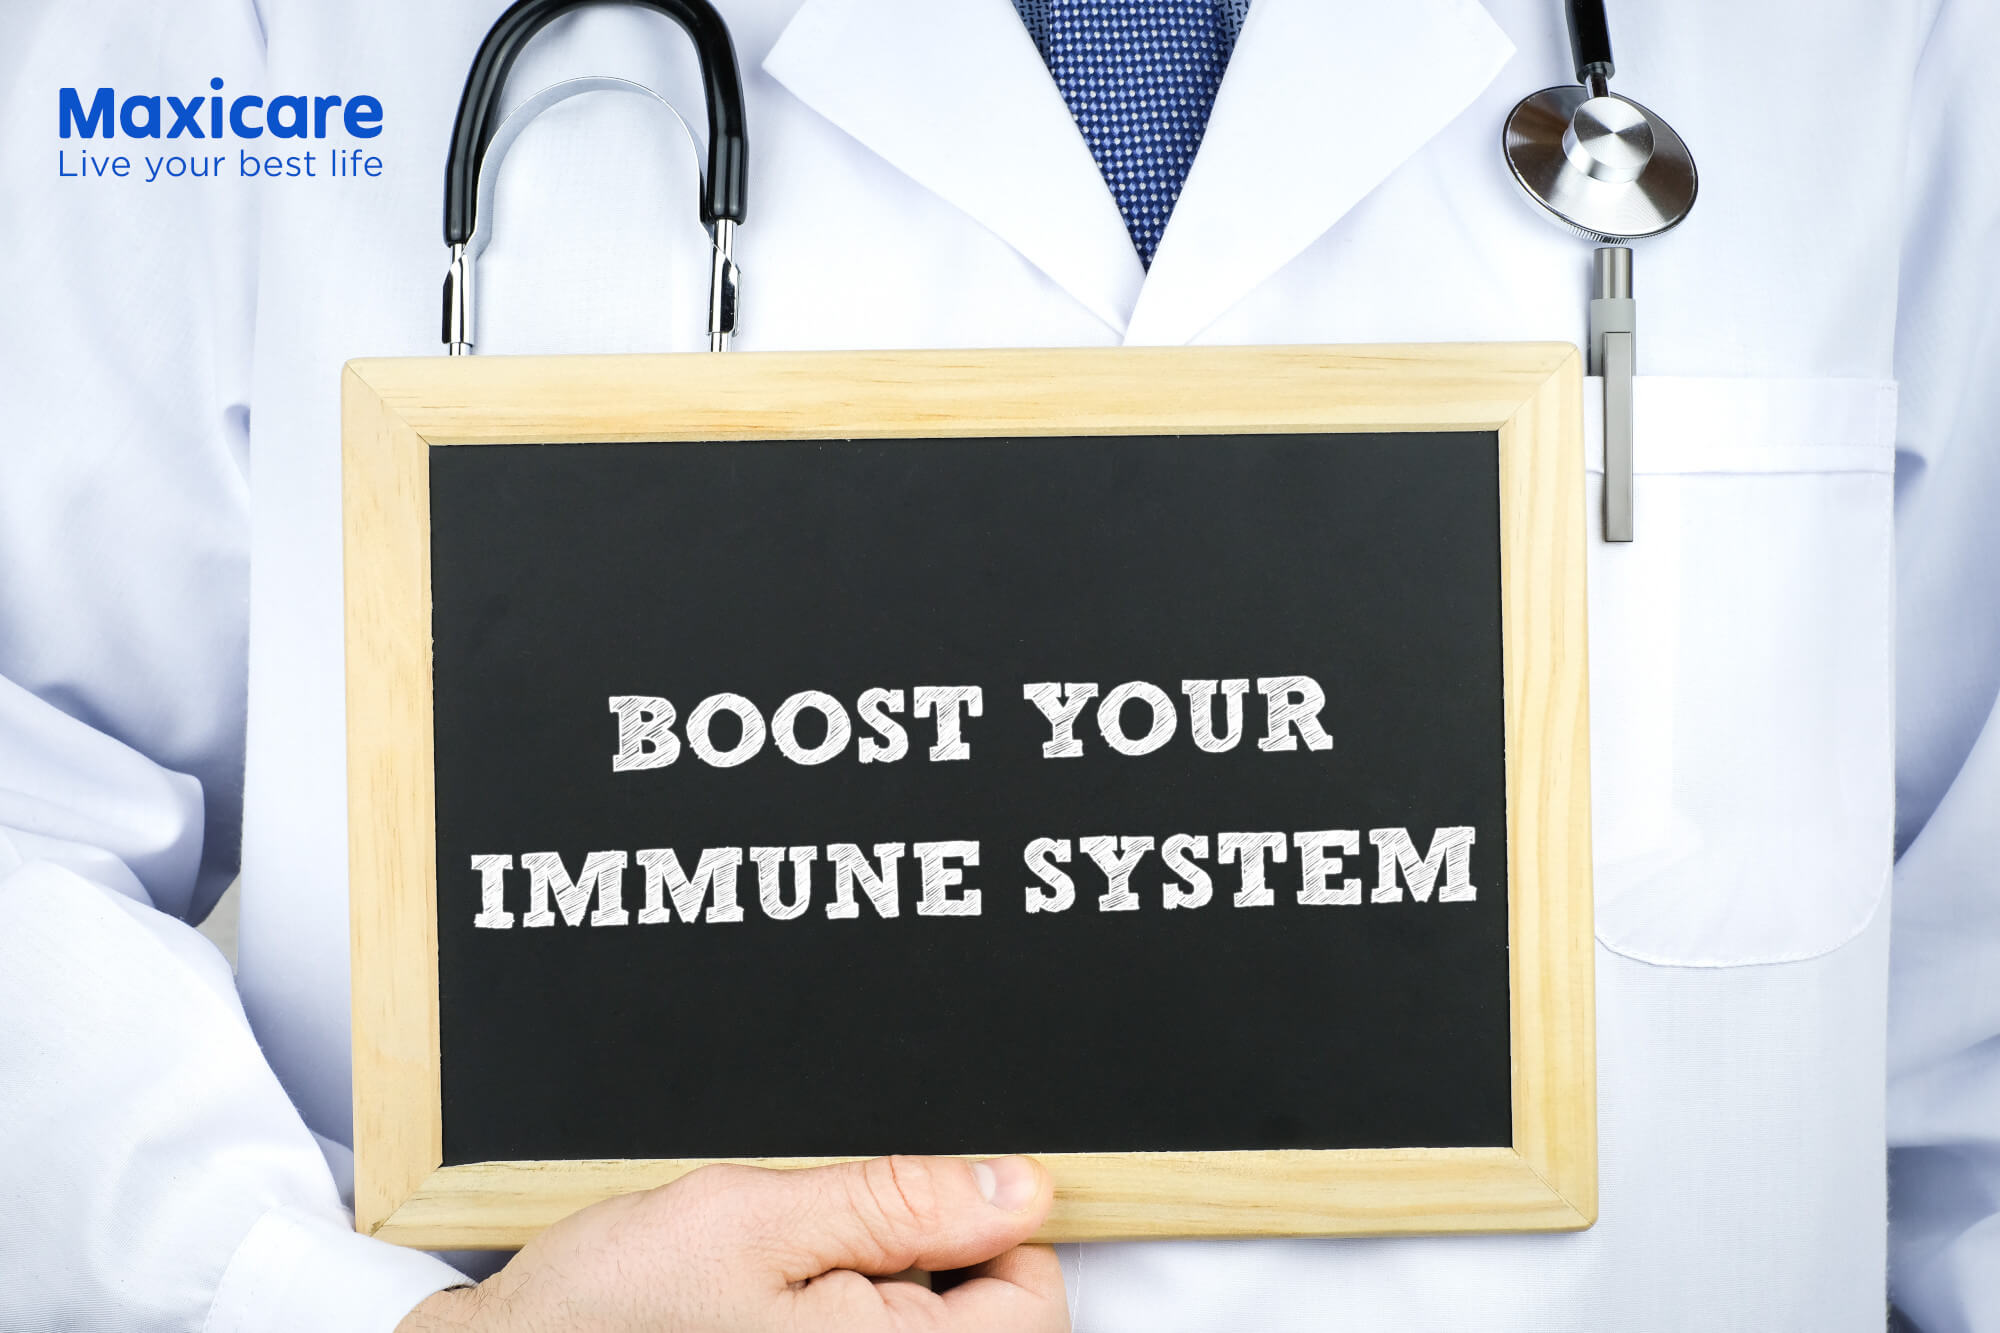 4 Ways to Boost Your Immune System